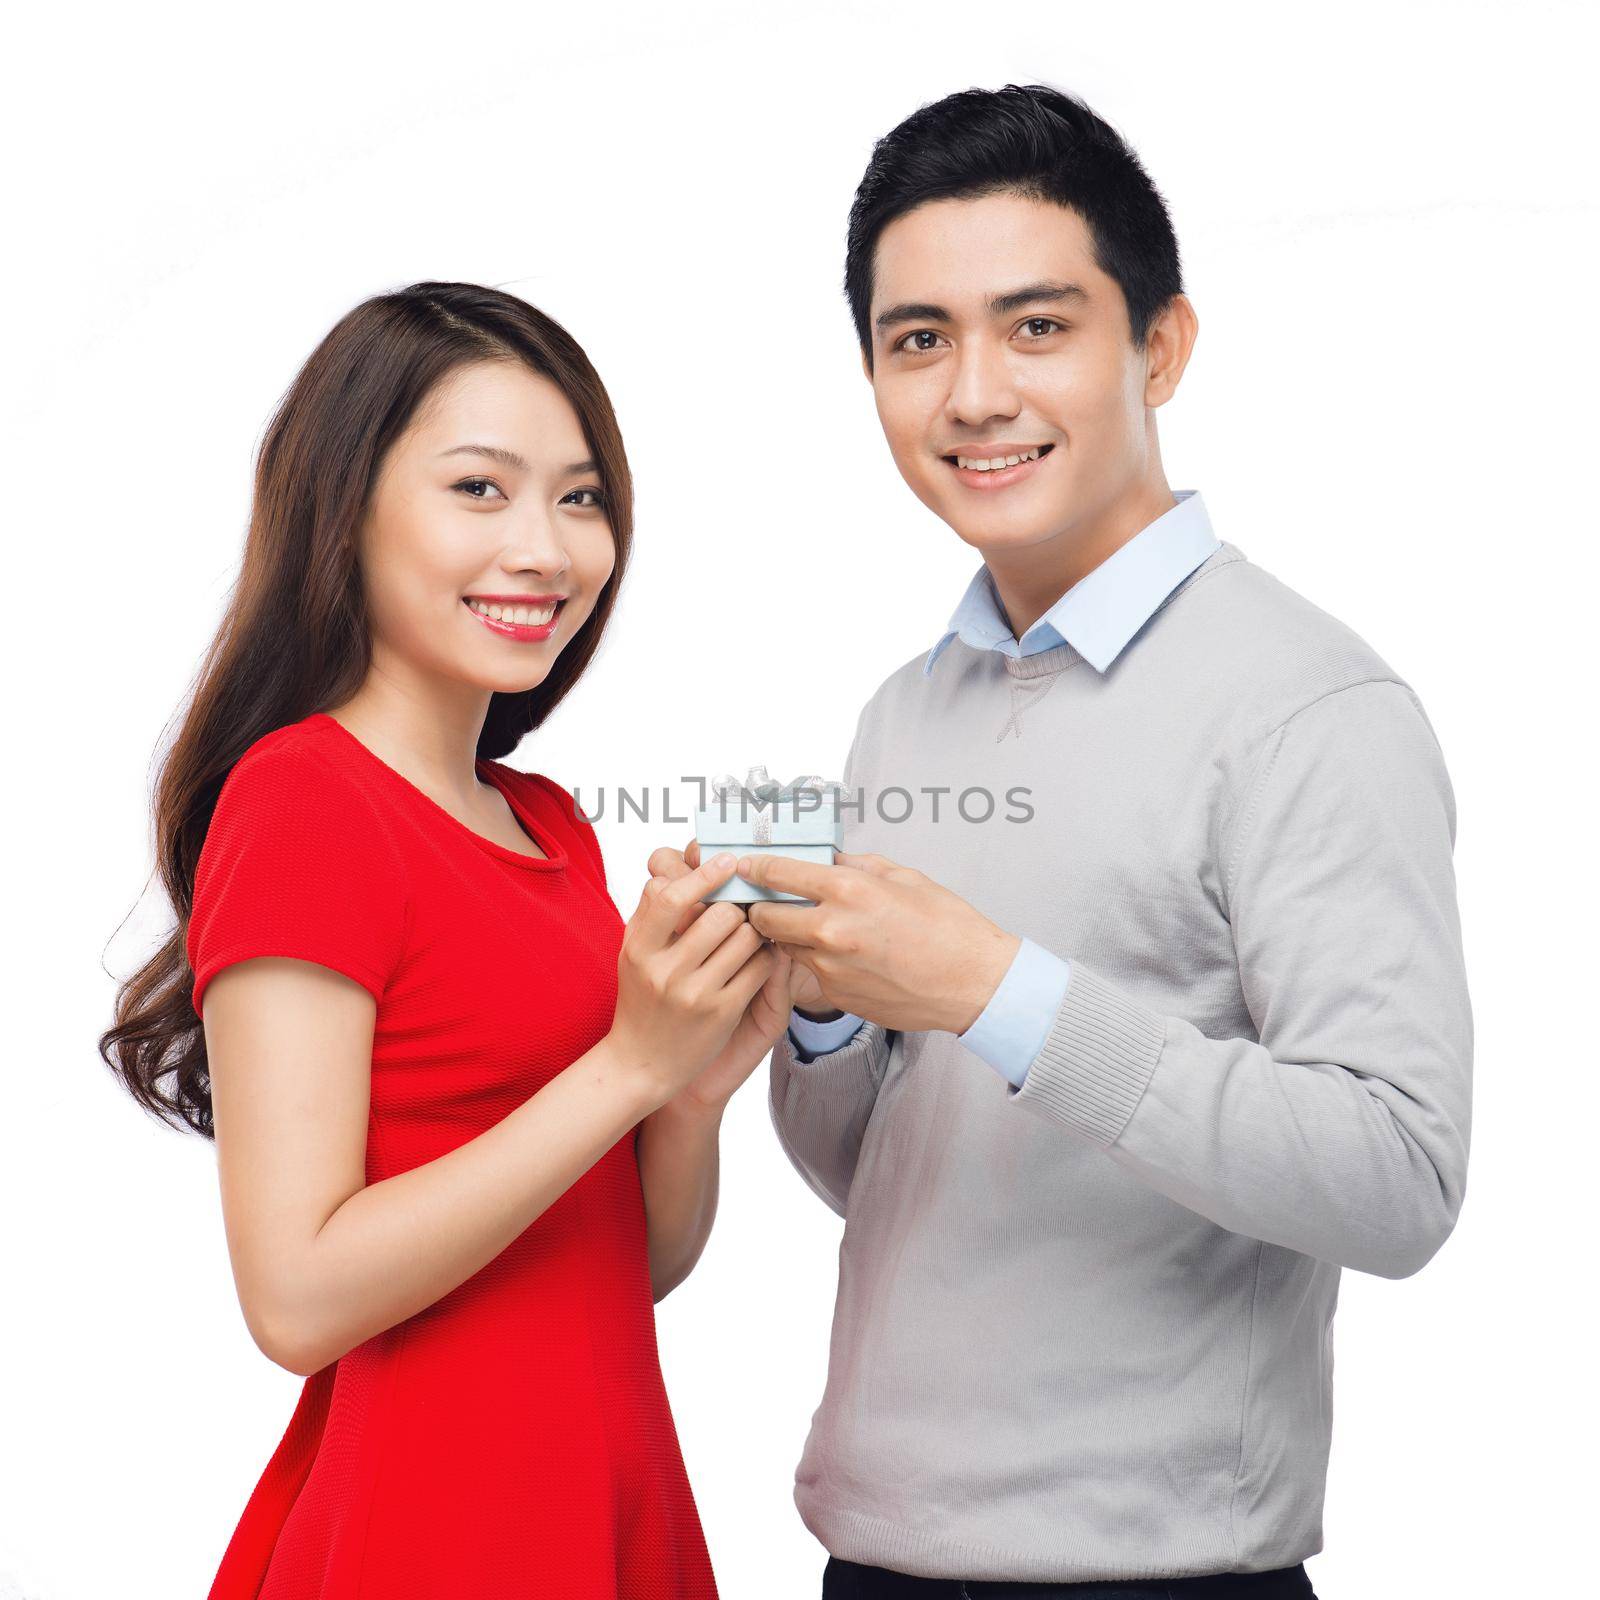 Asian man makes present to his lovely sweetheart. Young man giving a gift. Cheerful young couple man and woman at home offering to each other gifts for lover's valentine day